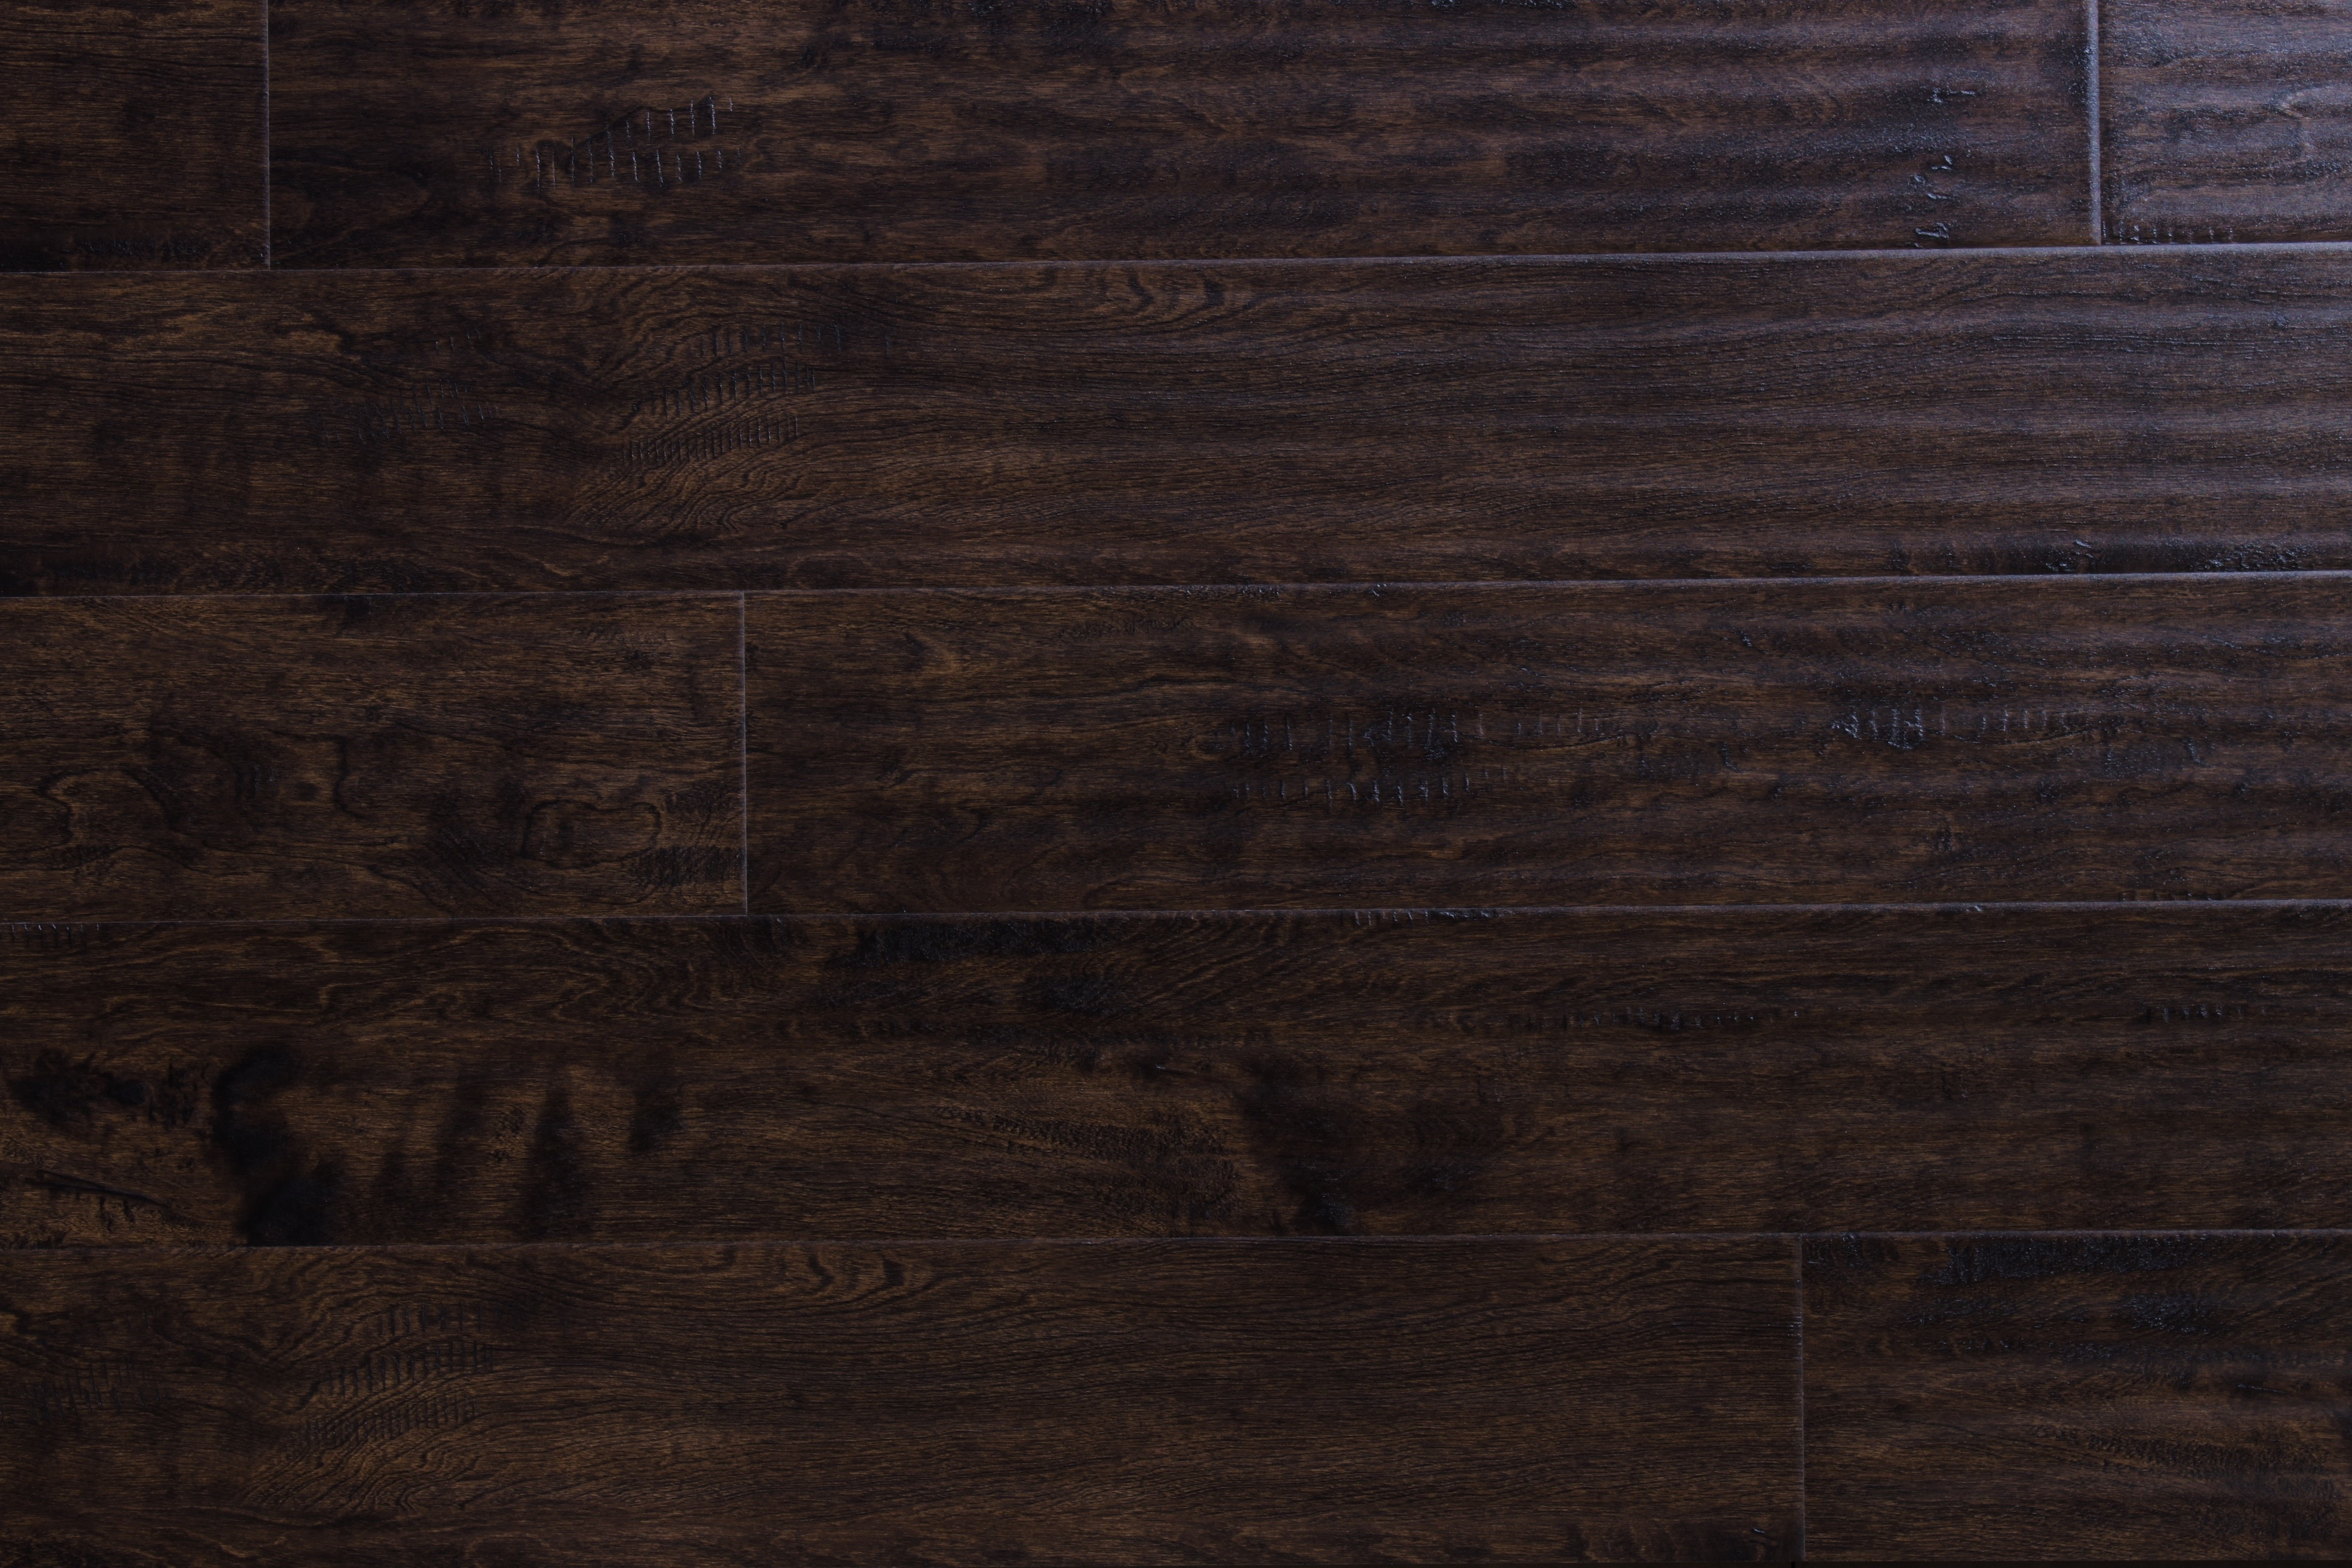 13 Great Types Of Laminate Hardwood Floors 2024 free download types of laminate hardwood floors of wood flooring free samples available at builddirecta within tailor multi gb 5874277bb8d3c